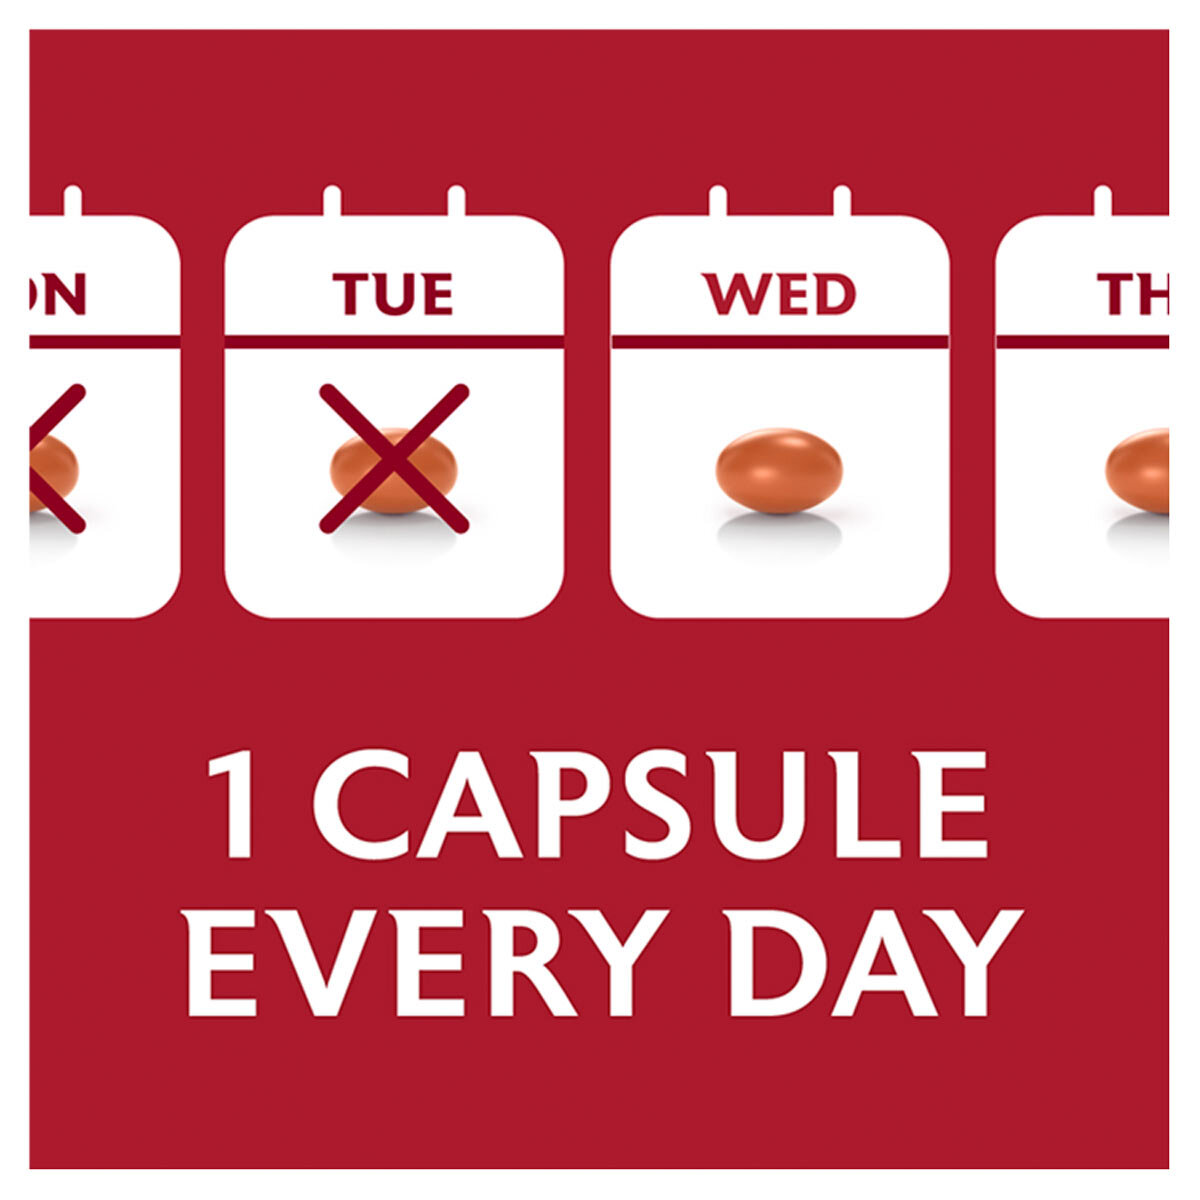 1 Capsule Every Day